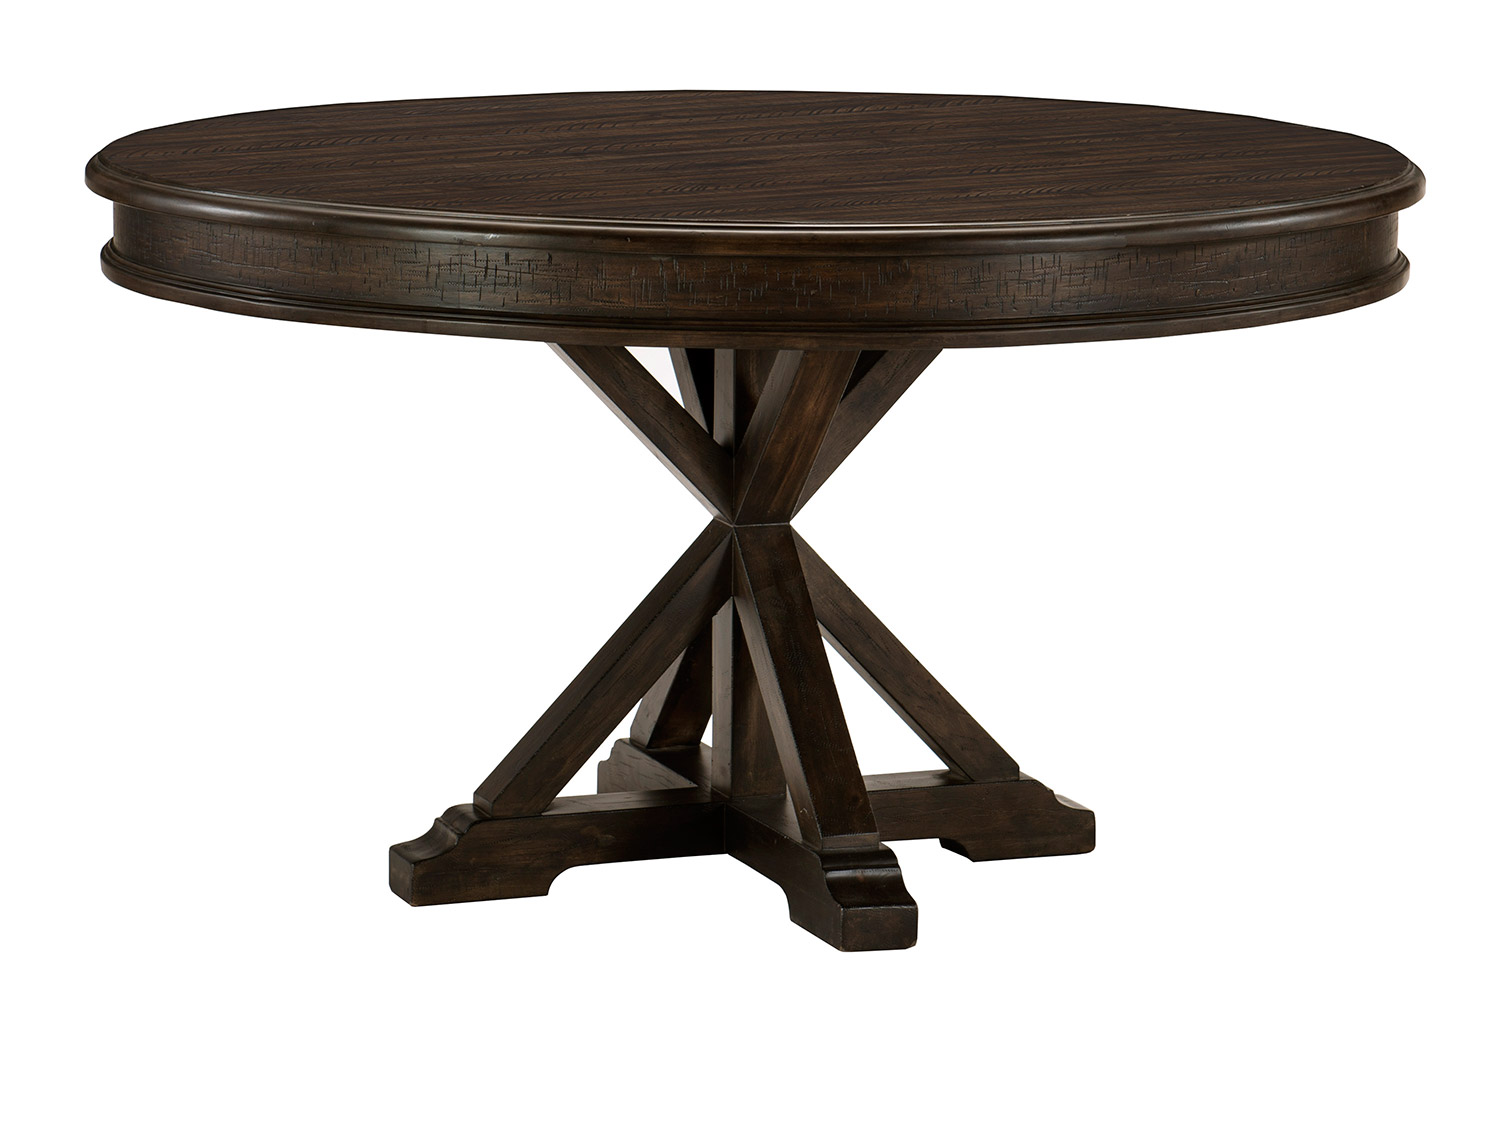 Homelegance Cardano Round Dining Table - Driftwood Charcoal